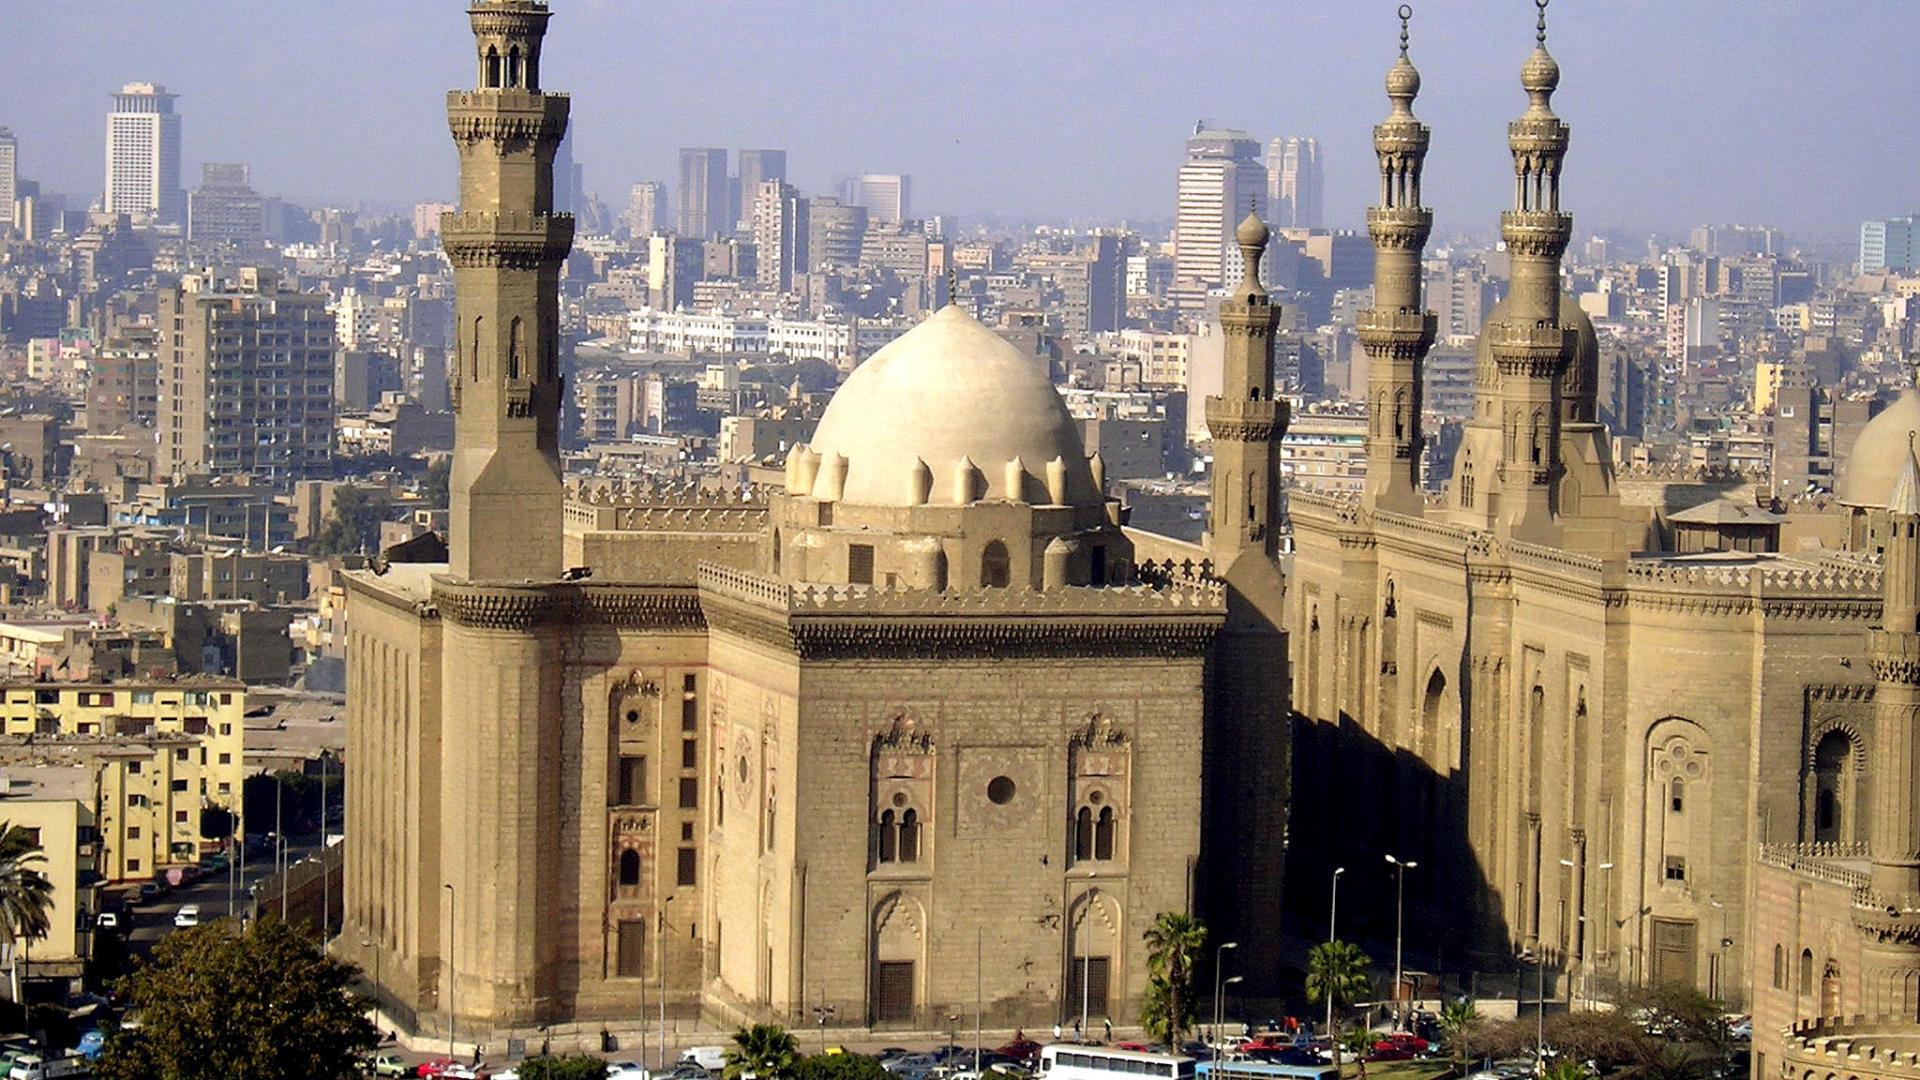 Ancient architecture in Cairo wallpaper and image